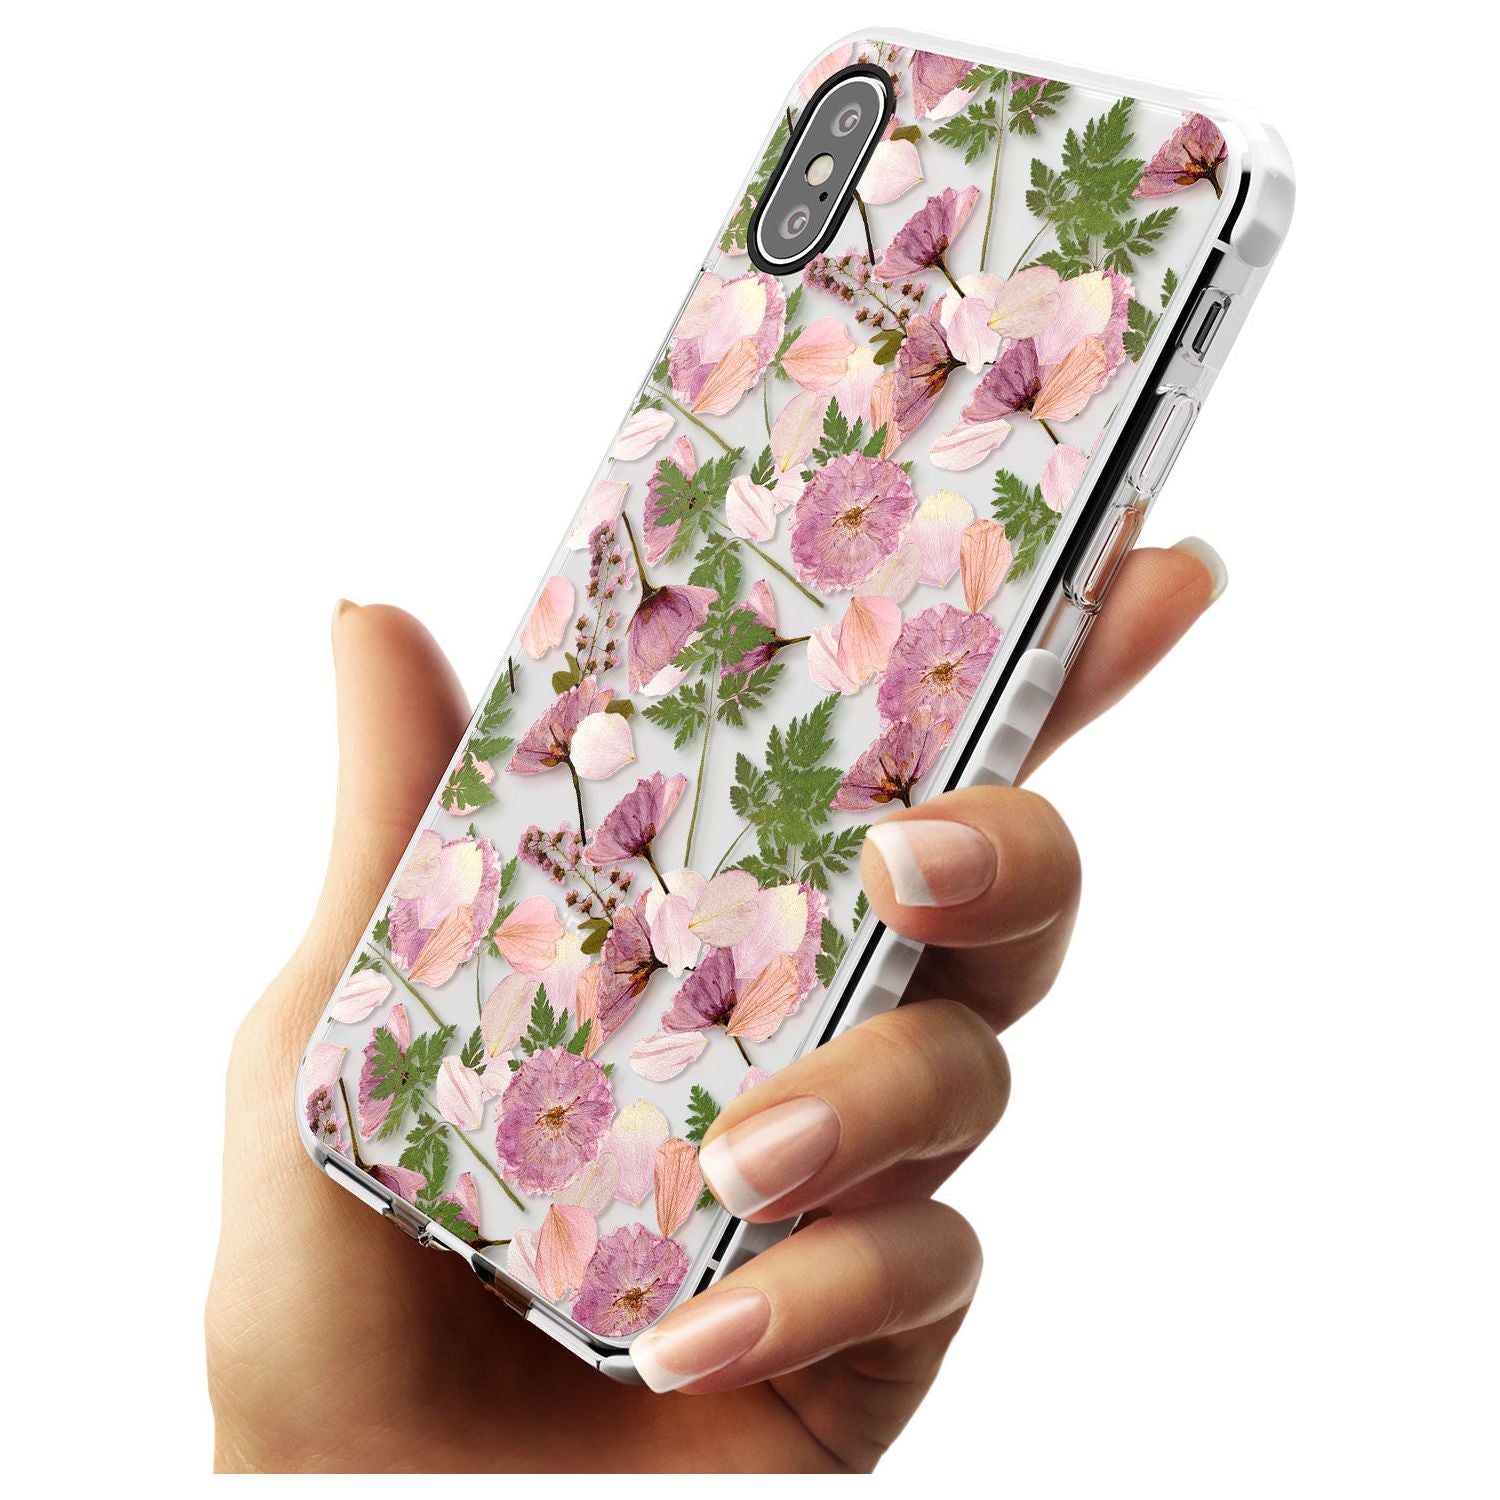 Leafy Floral Pattern Transparent Design Impact Phone Case for iPhone X XS Max XR